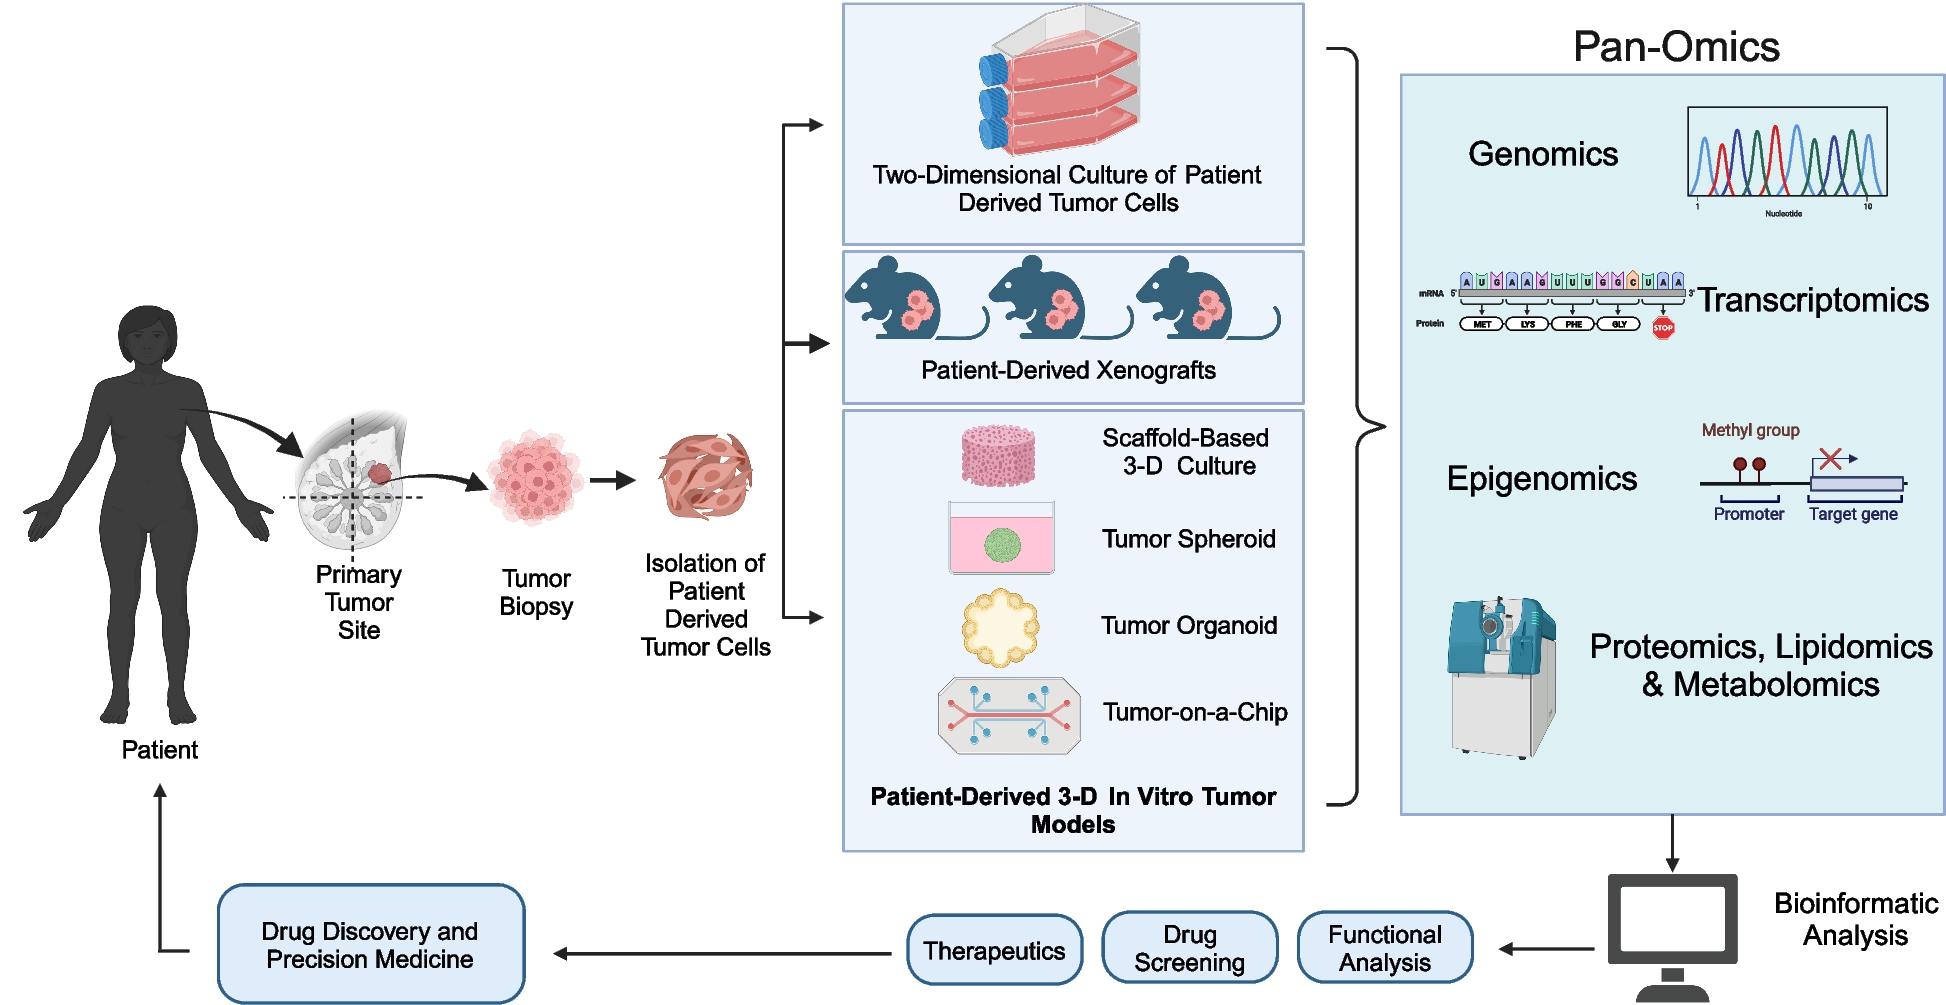 Integration of pan-omics technologies and three-dimensional in vitro tumor models: an approach toward drug discovery and precision medicine